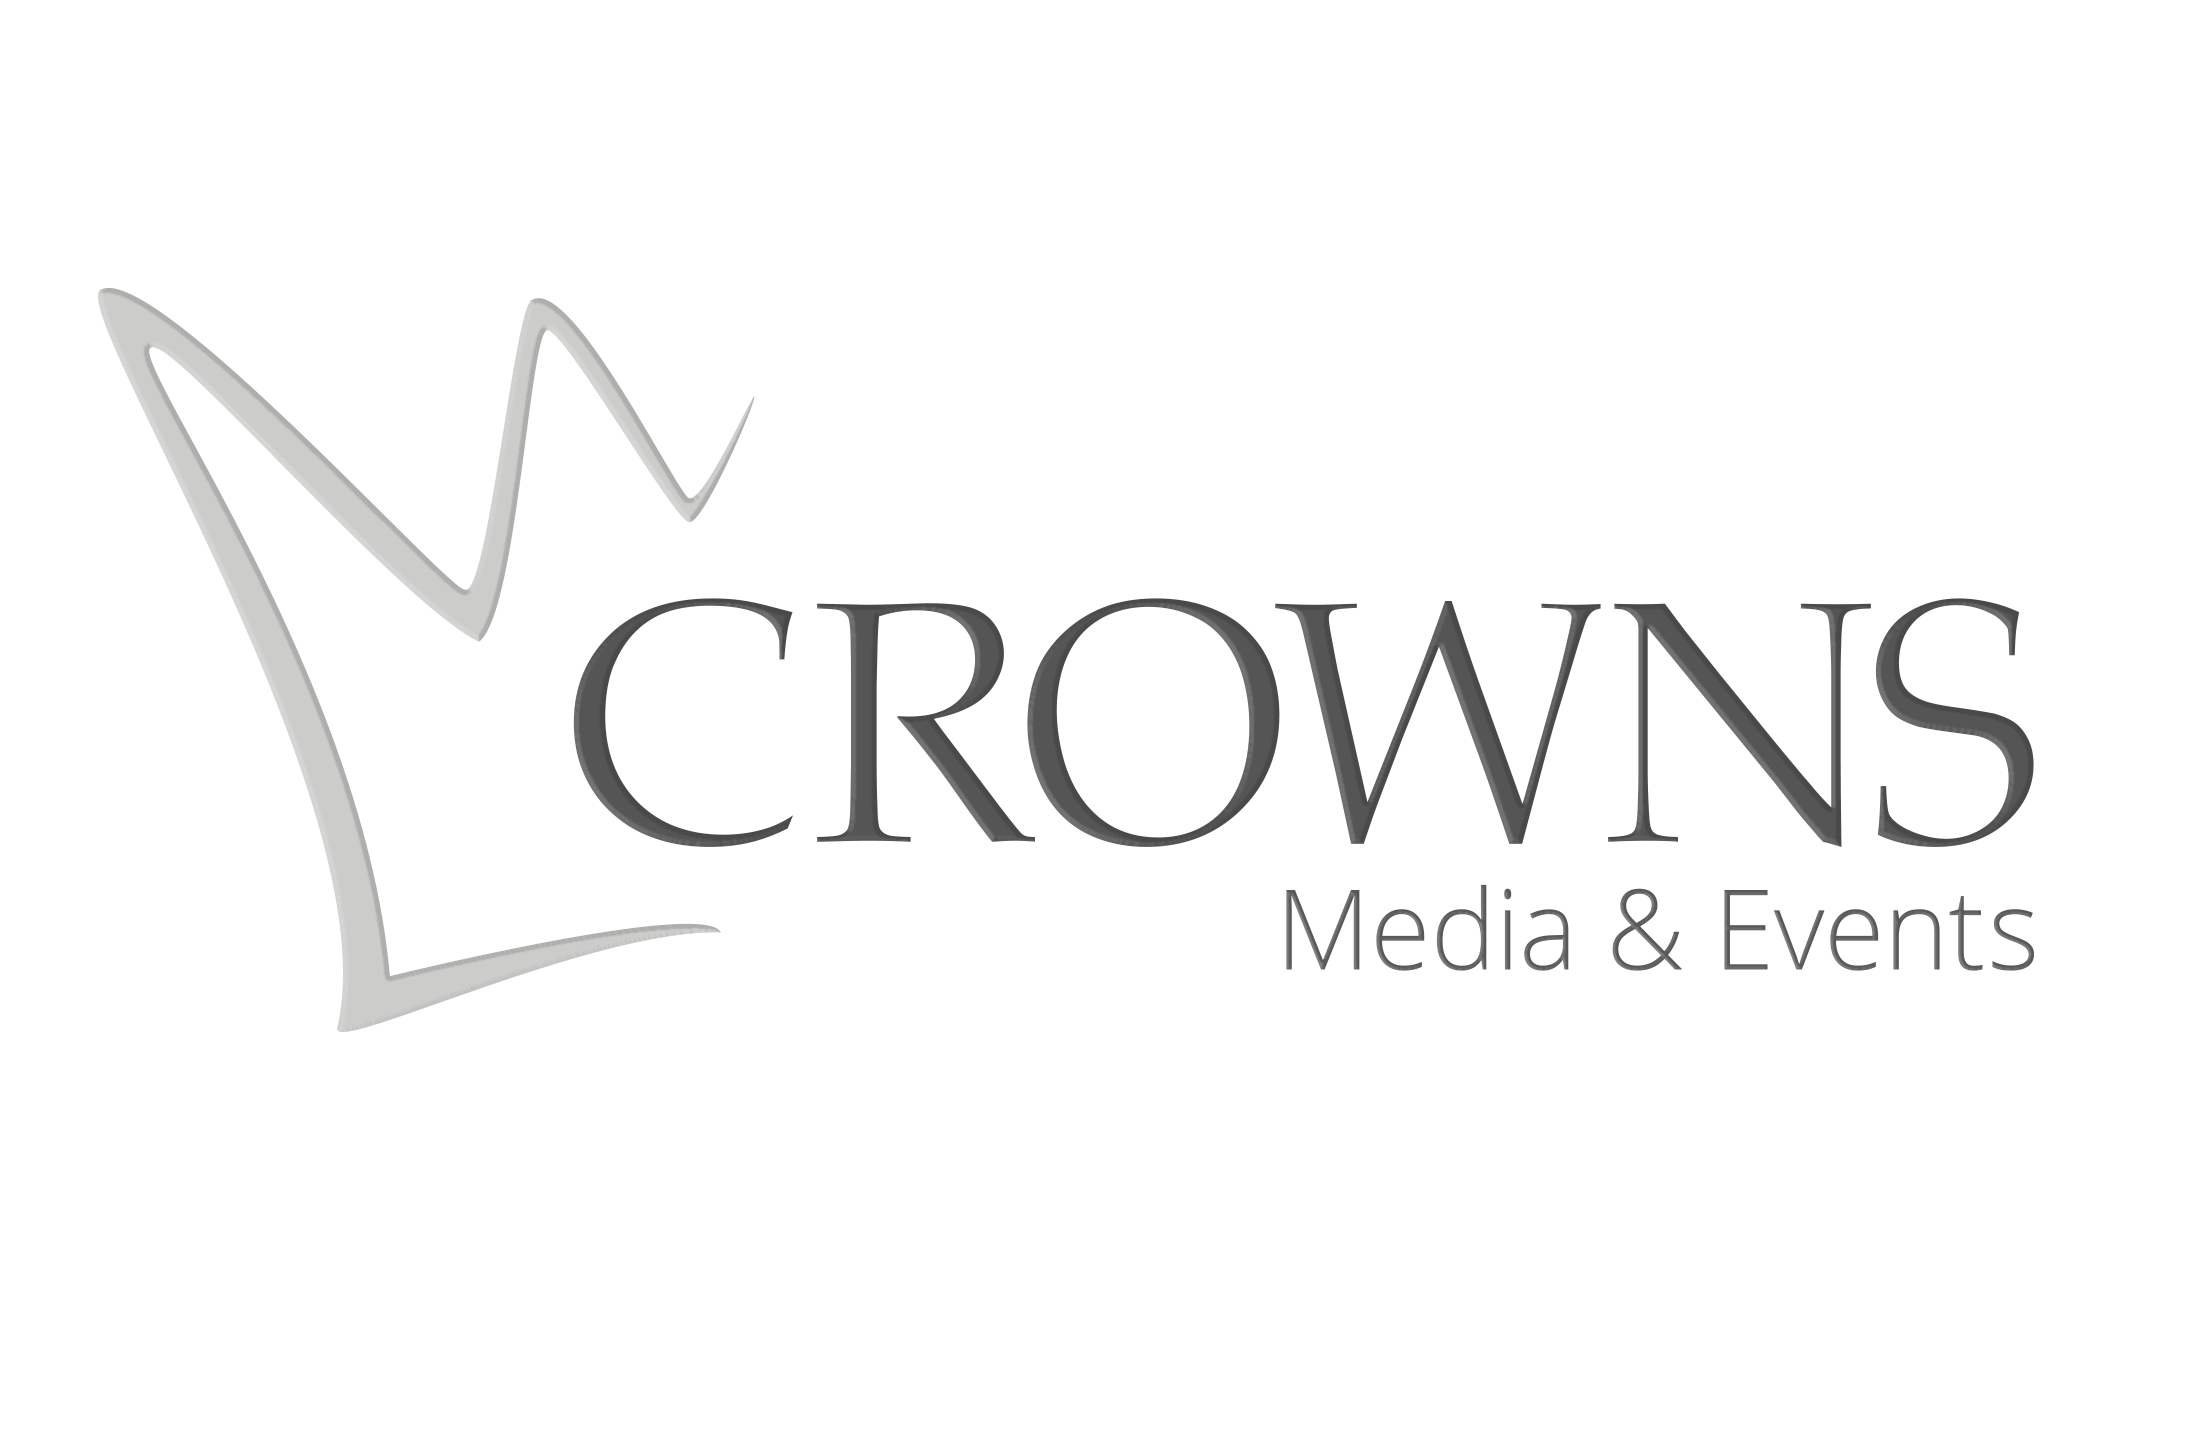 CROWNS - Media & Events